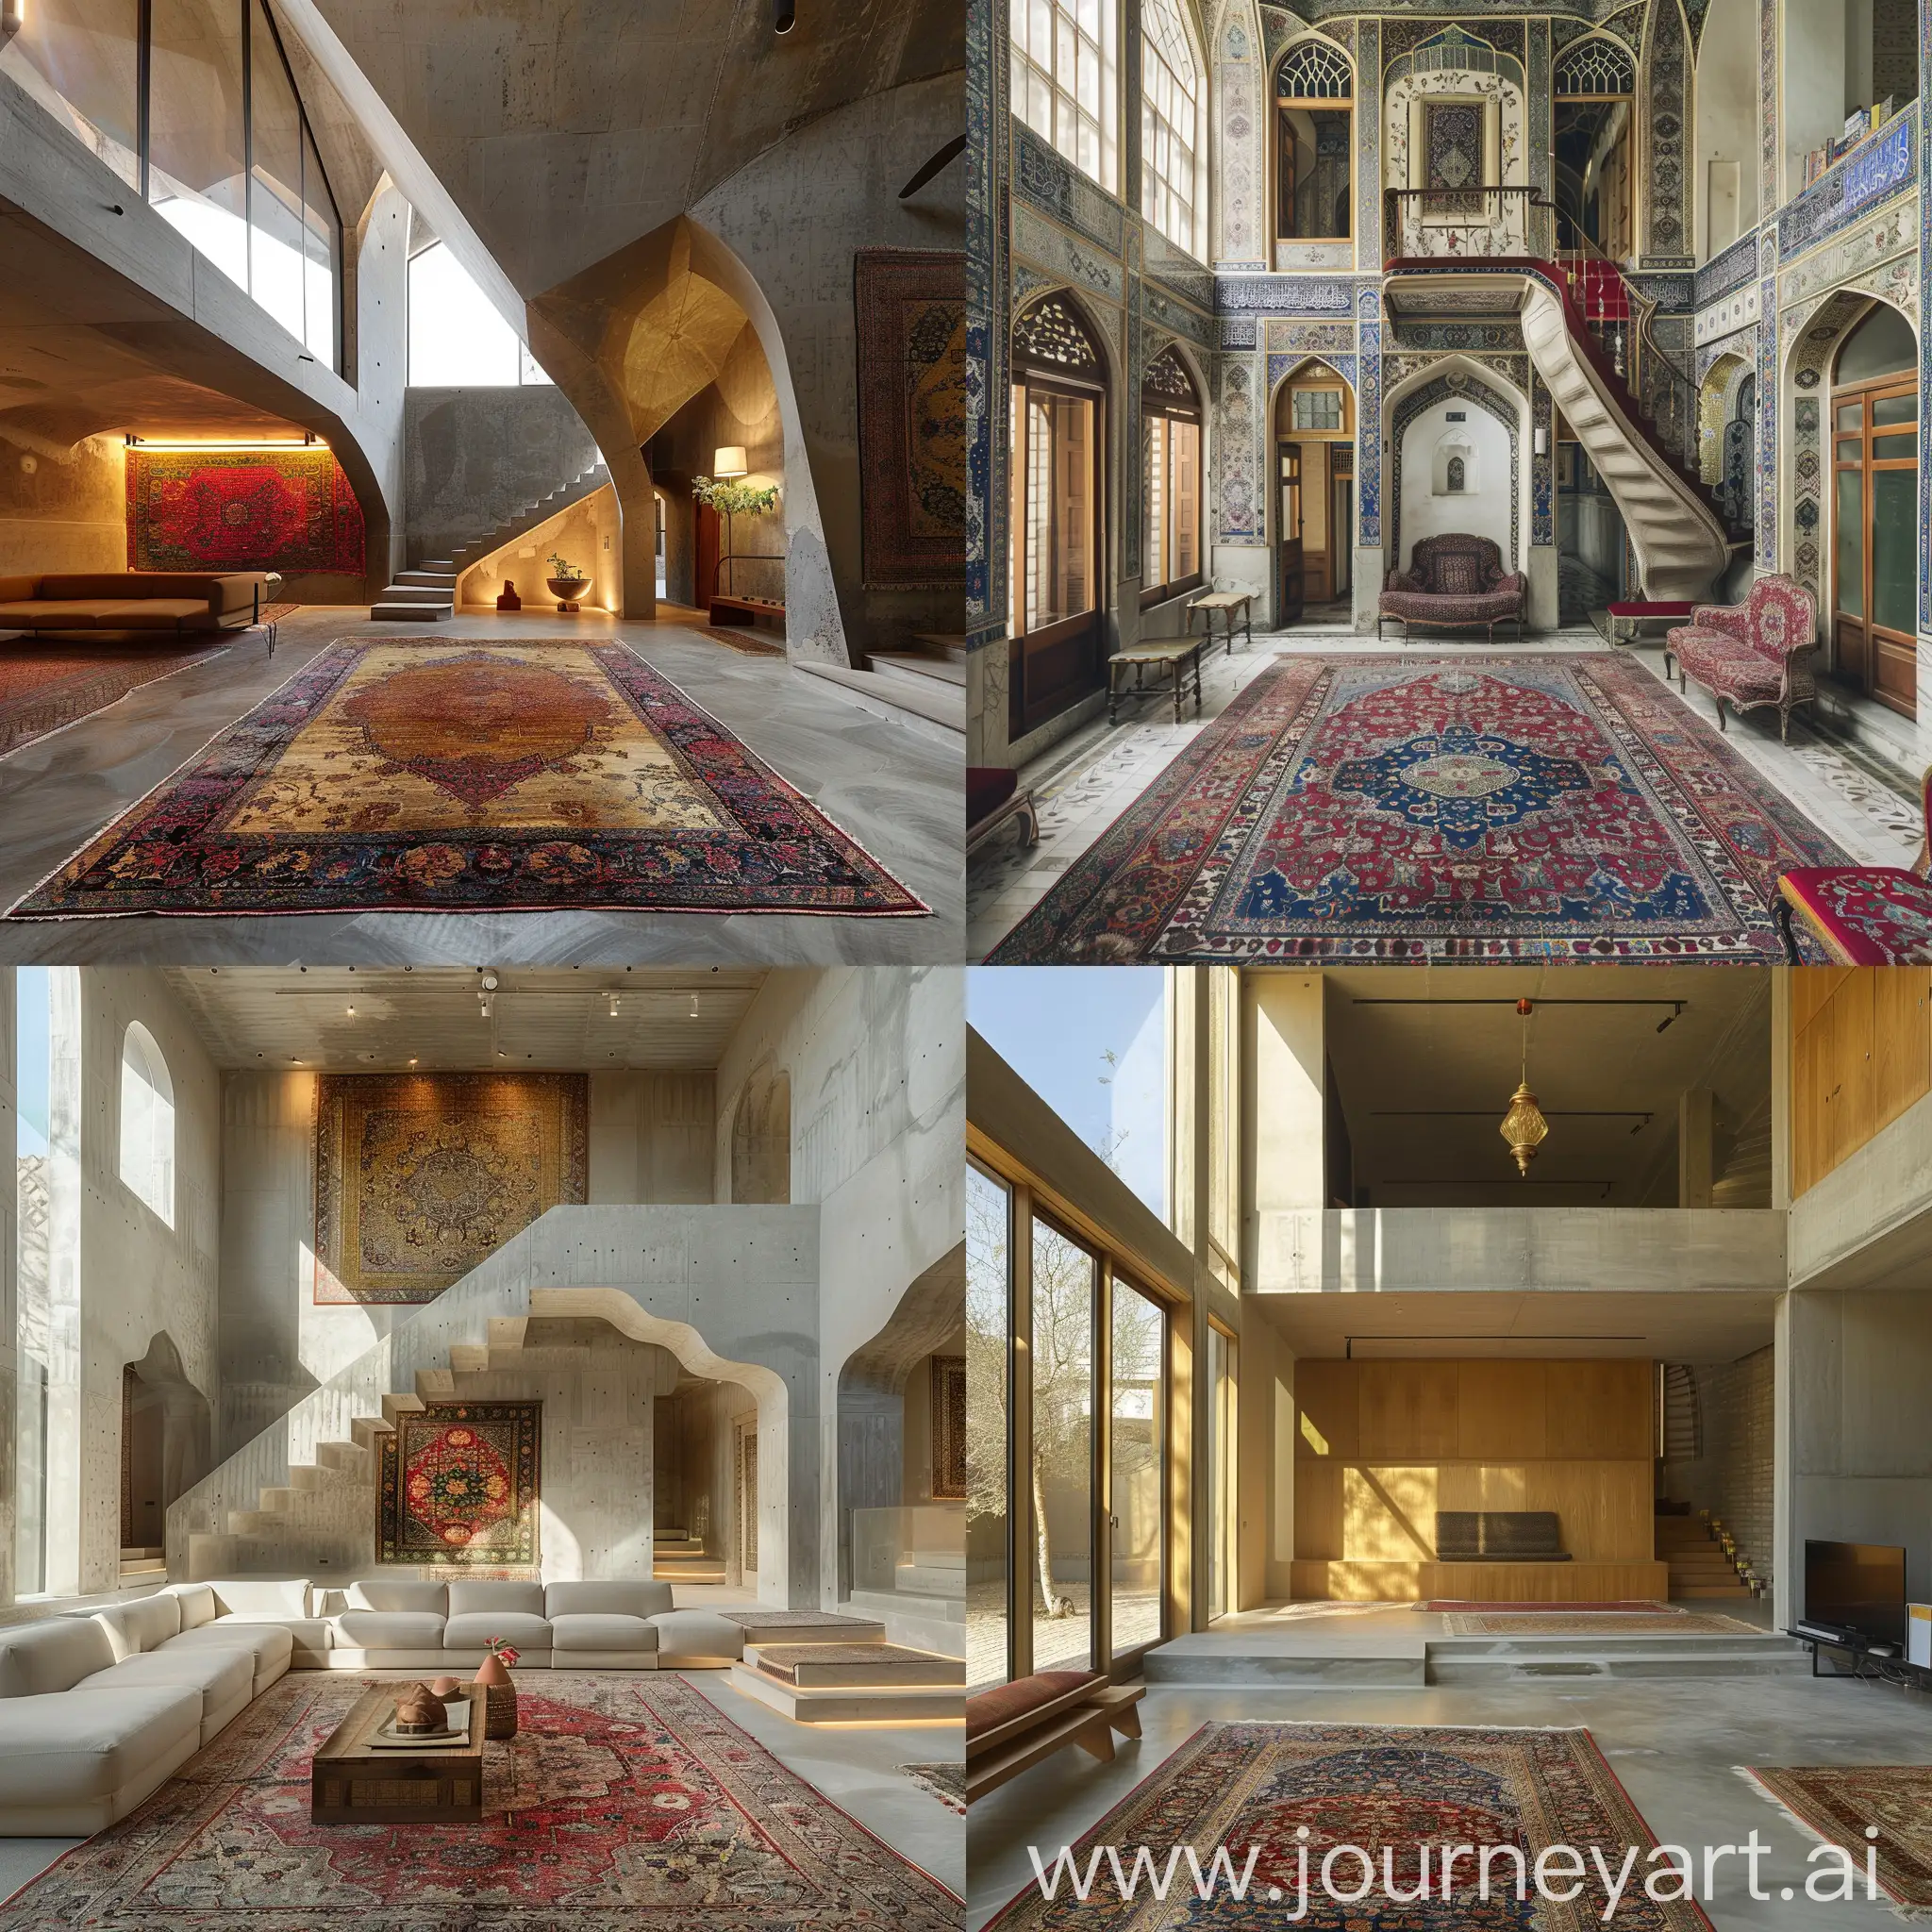 Integration-of-Iranian-Carpets-in-Architecture-Traditional-Design-Influence